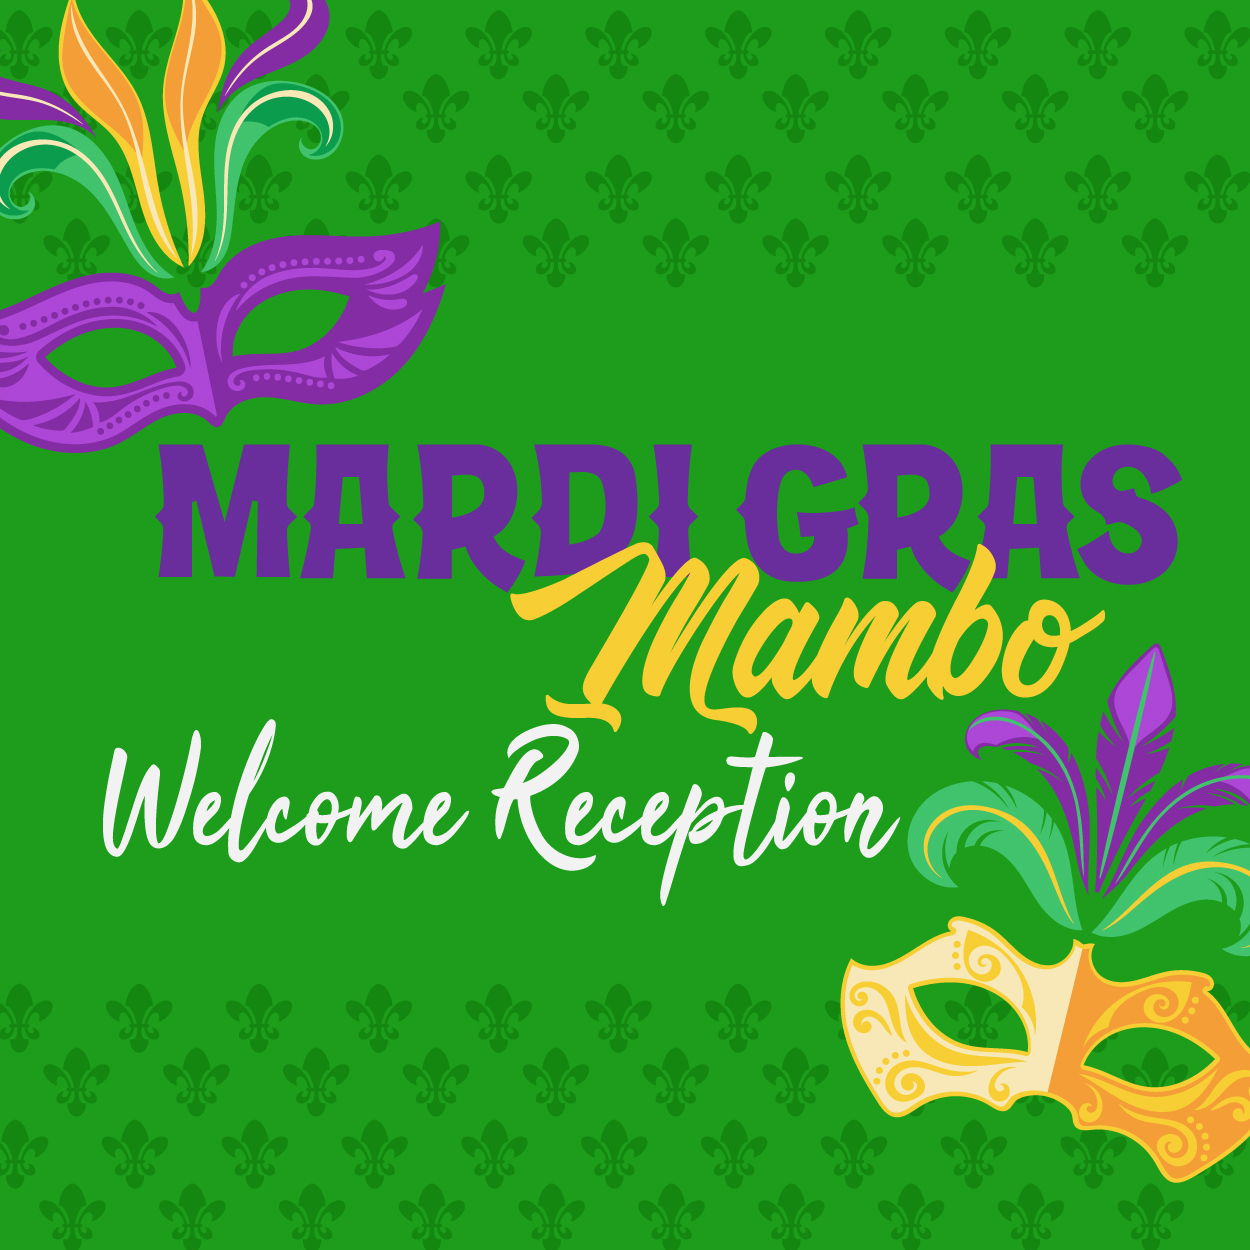 Welcome Reception Icon